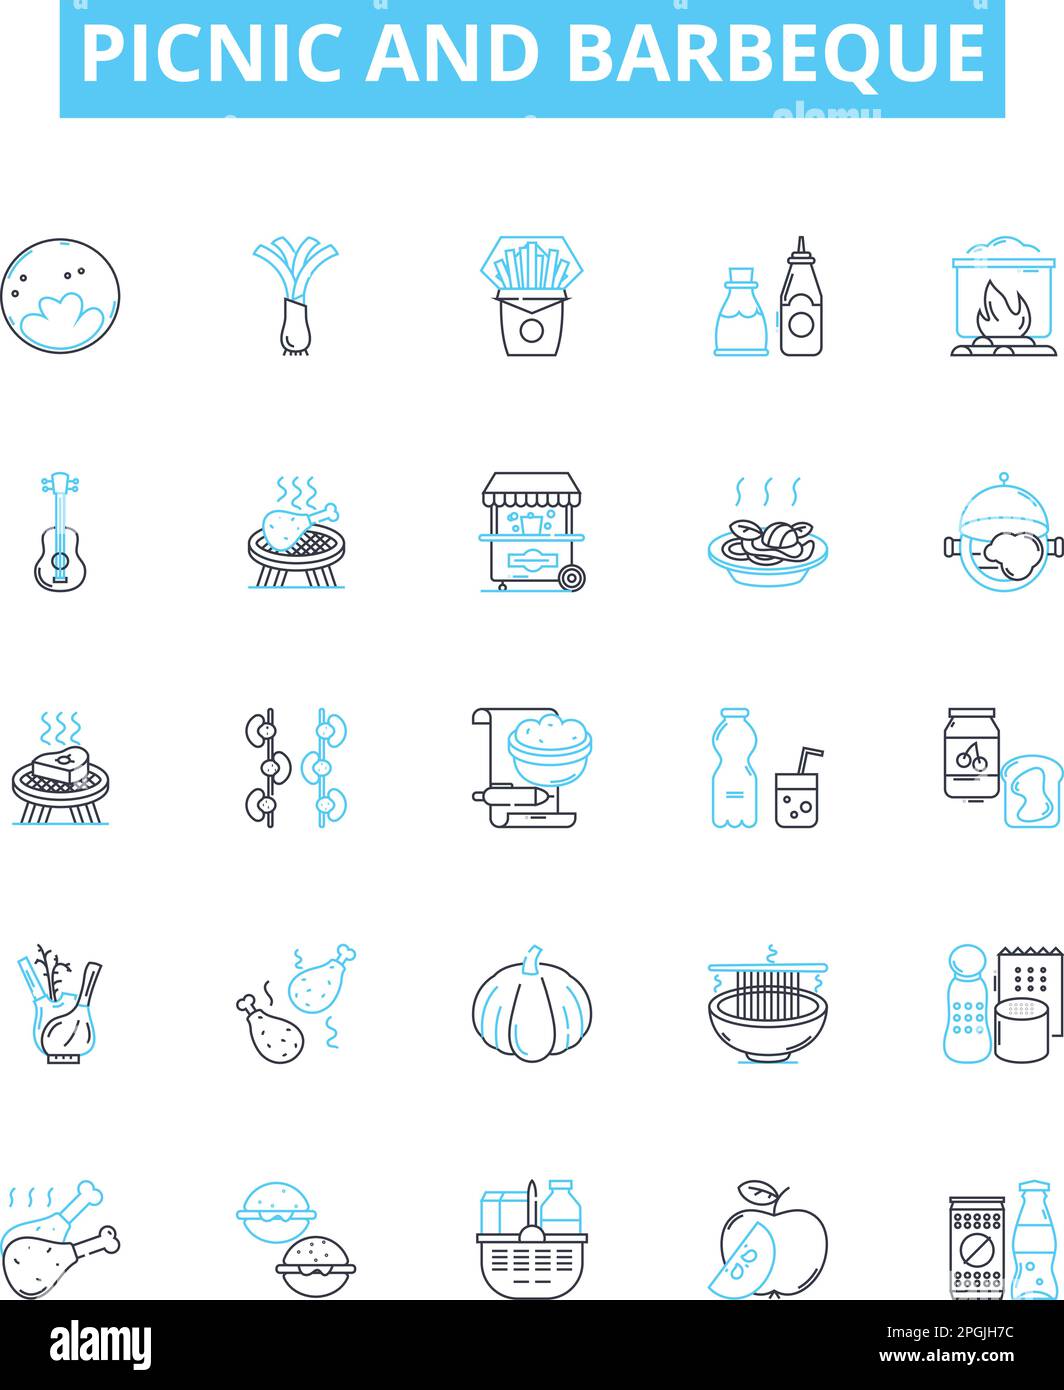 Picnic and barbeque vector line icons set. Picnic, Barbeque, BBQ, Outdoor, Grill, Cookout, Feast illustration outline concept symbols and signs Stock Vector